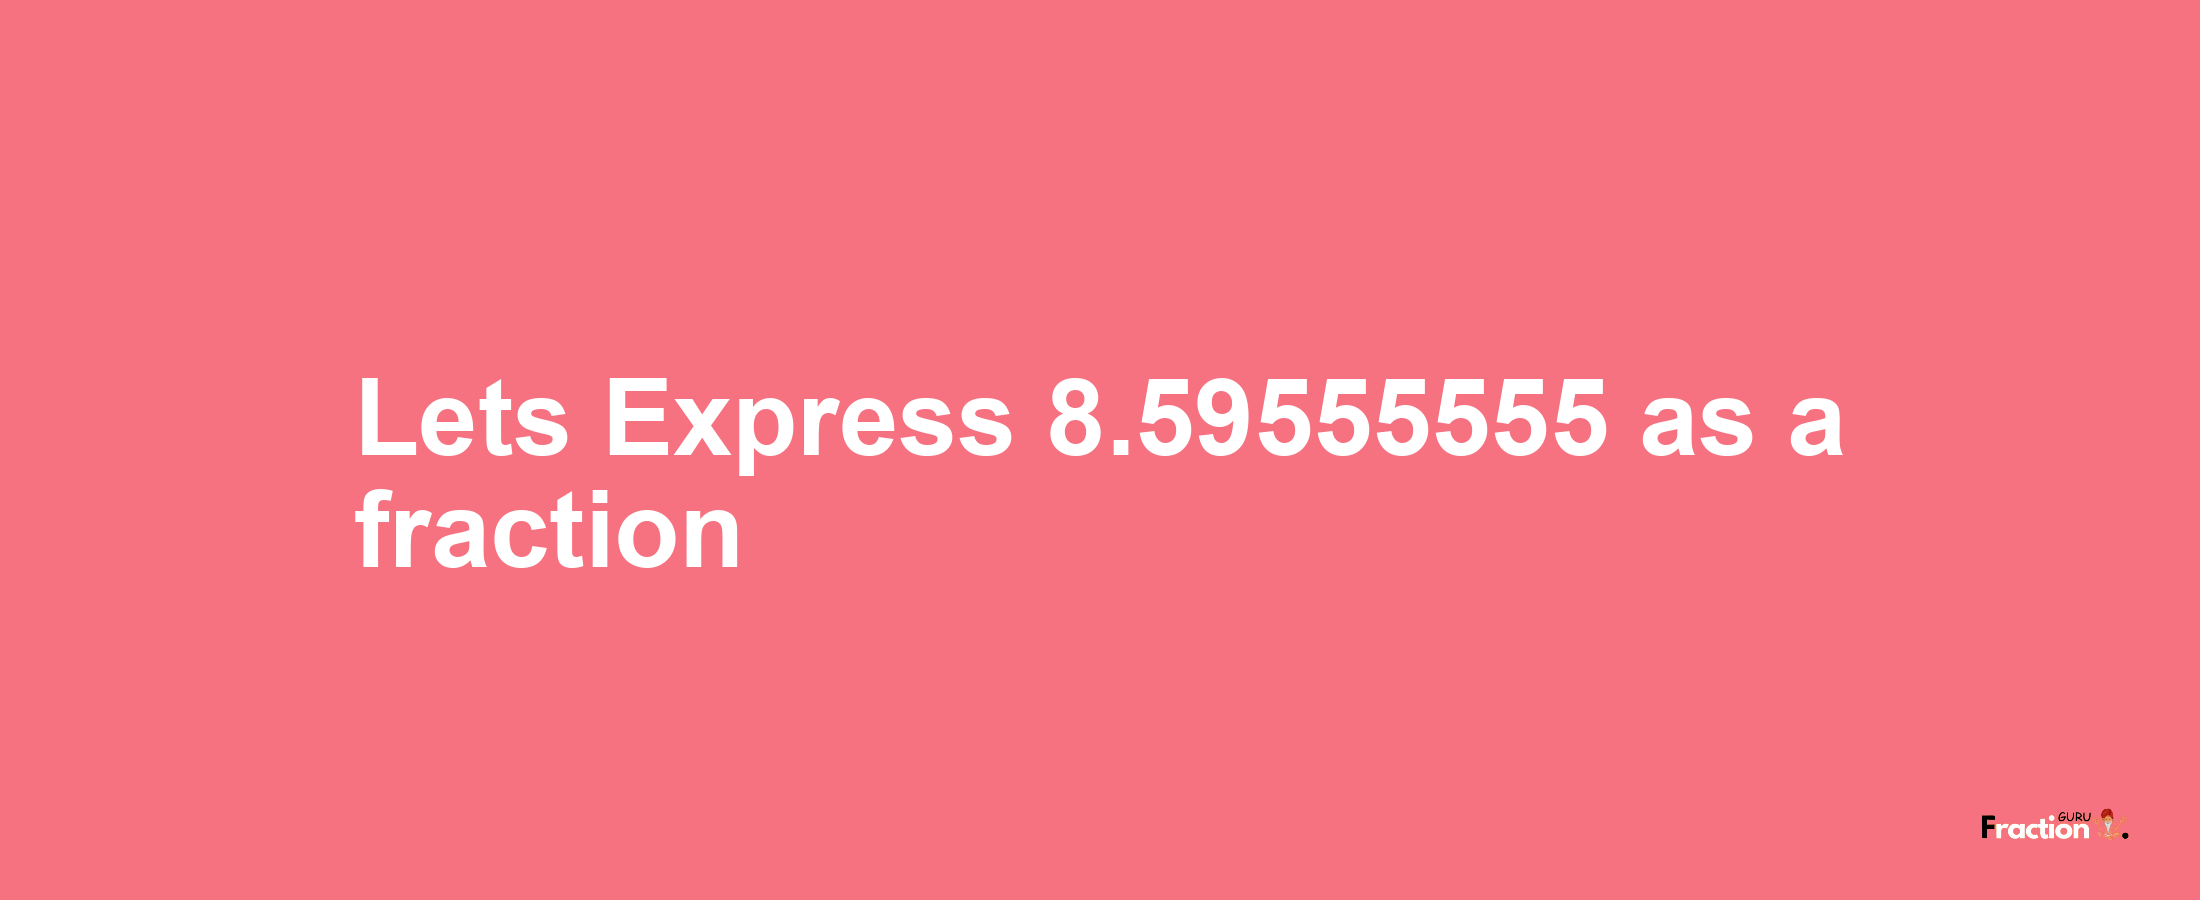 Lets Express 8.59555555 as afraction